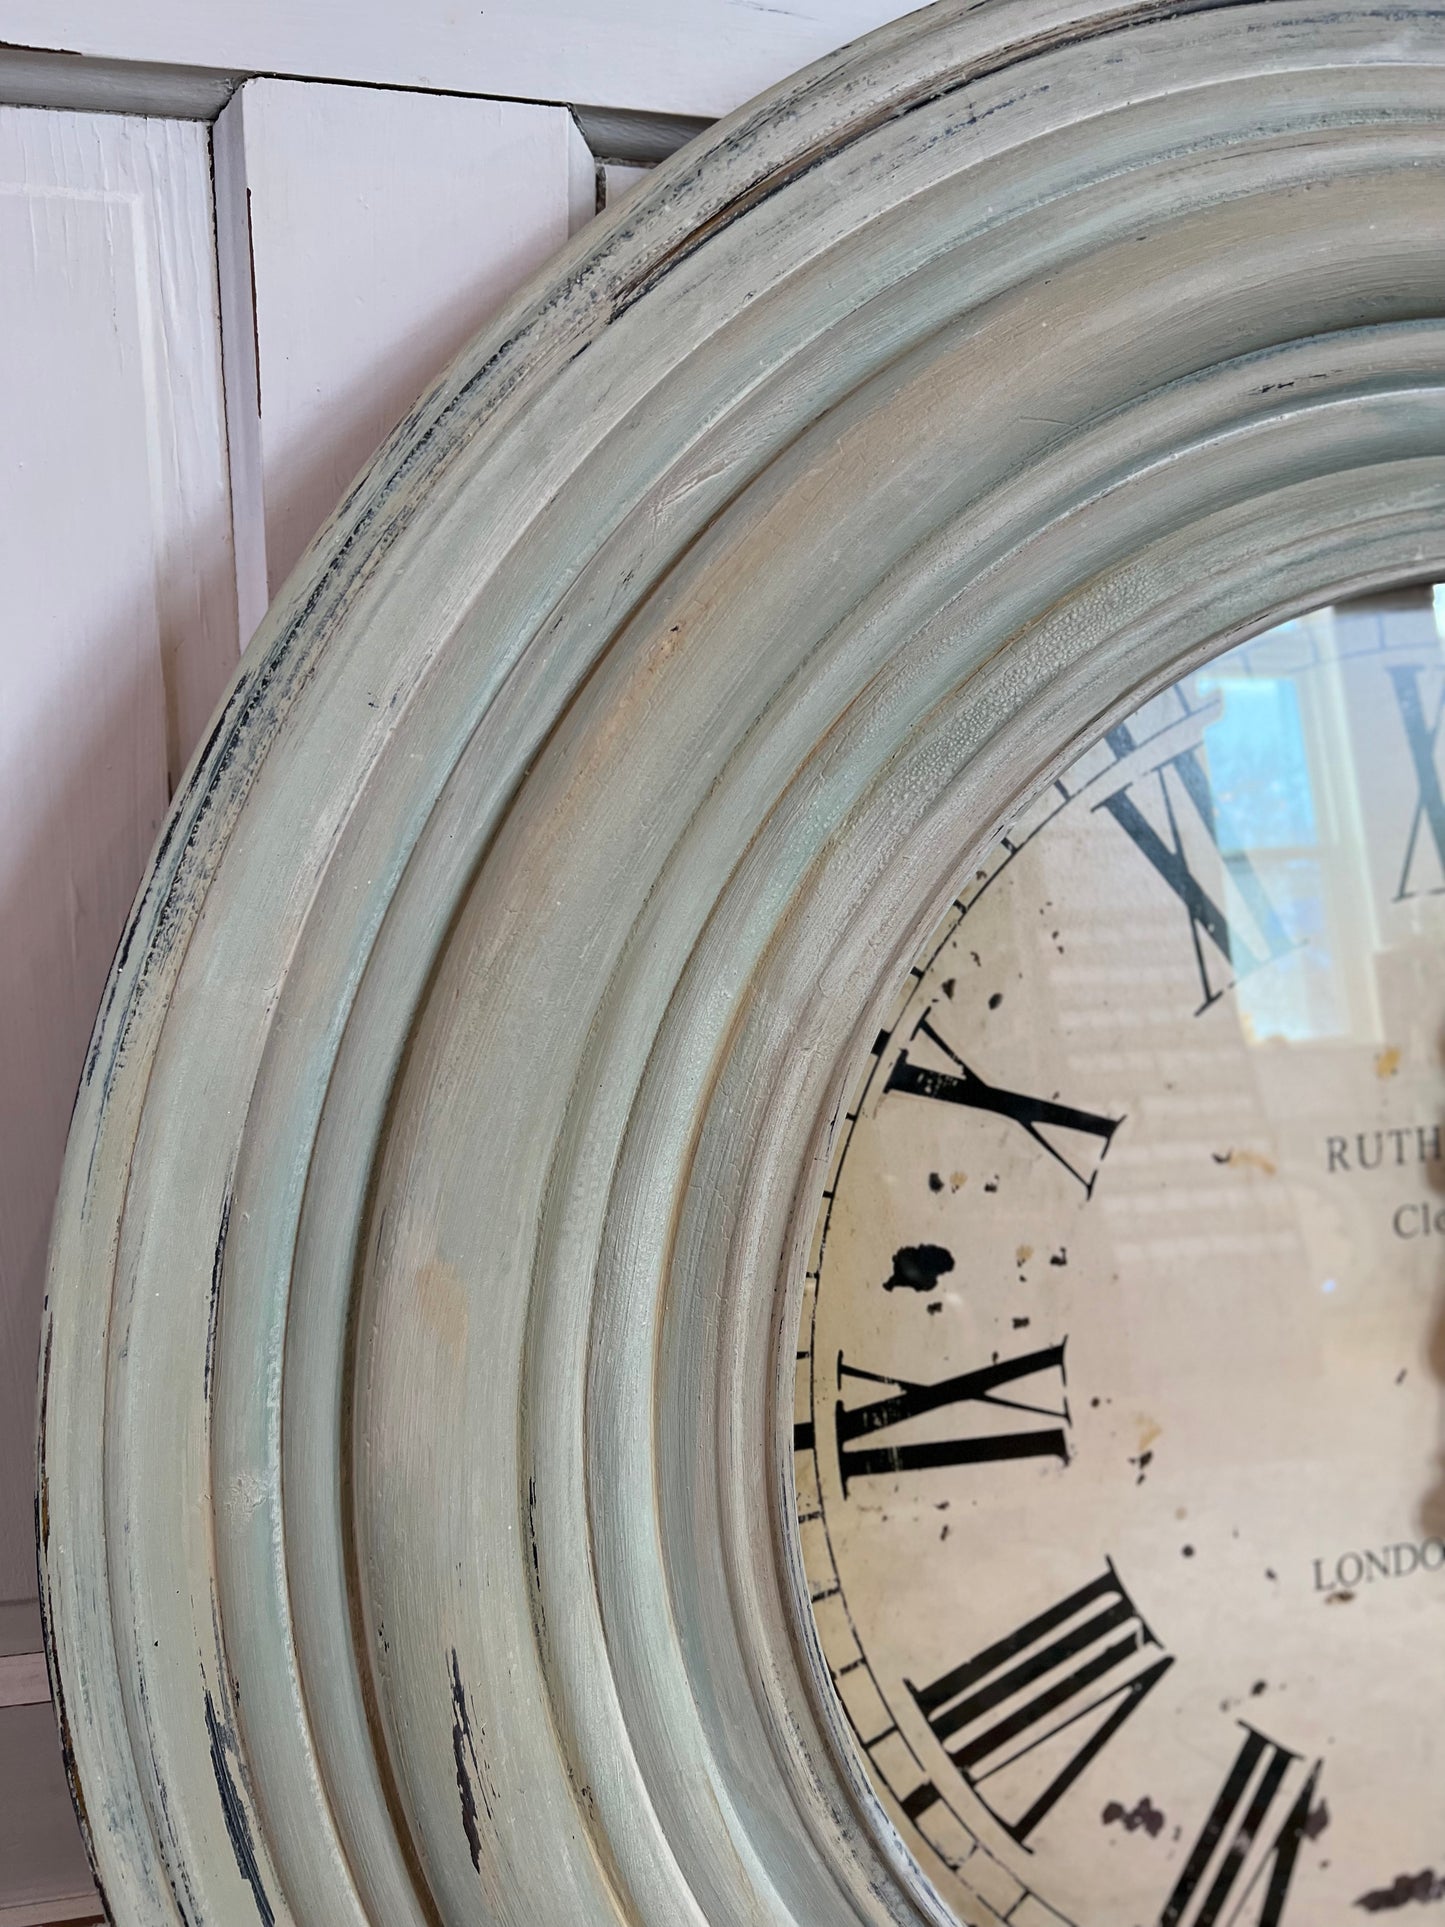 Oversized Rutherford Clock - hand painted